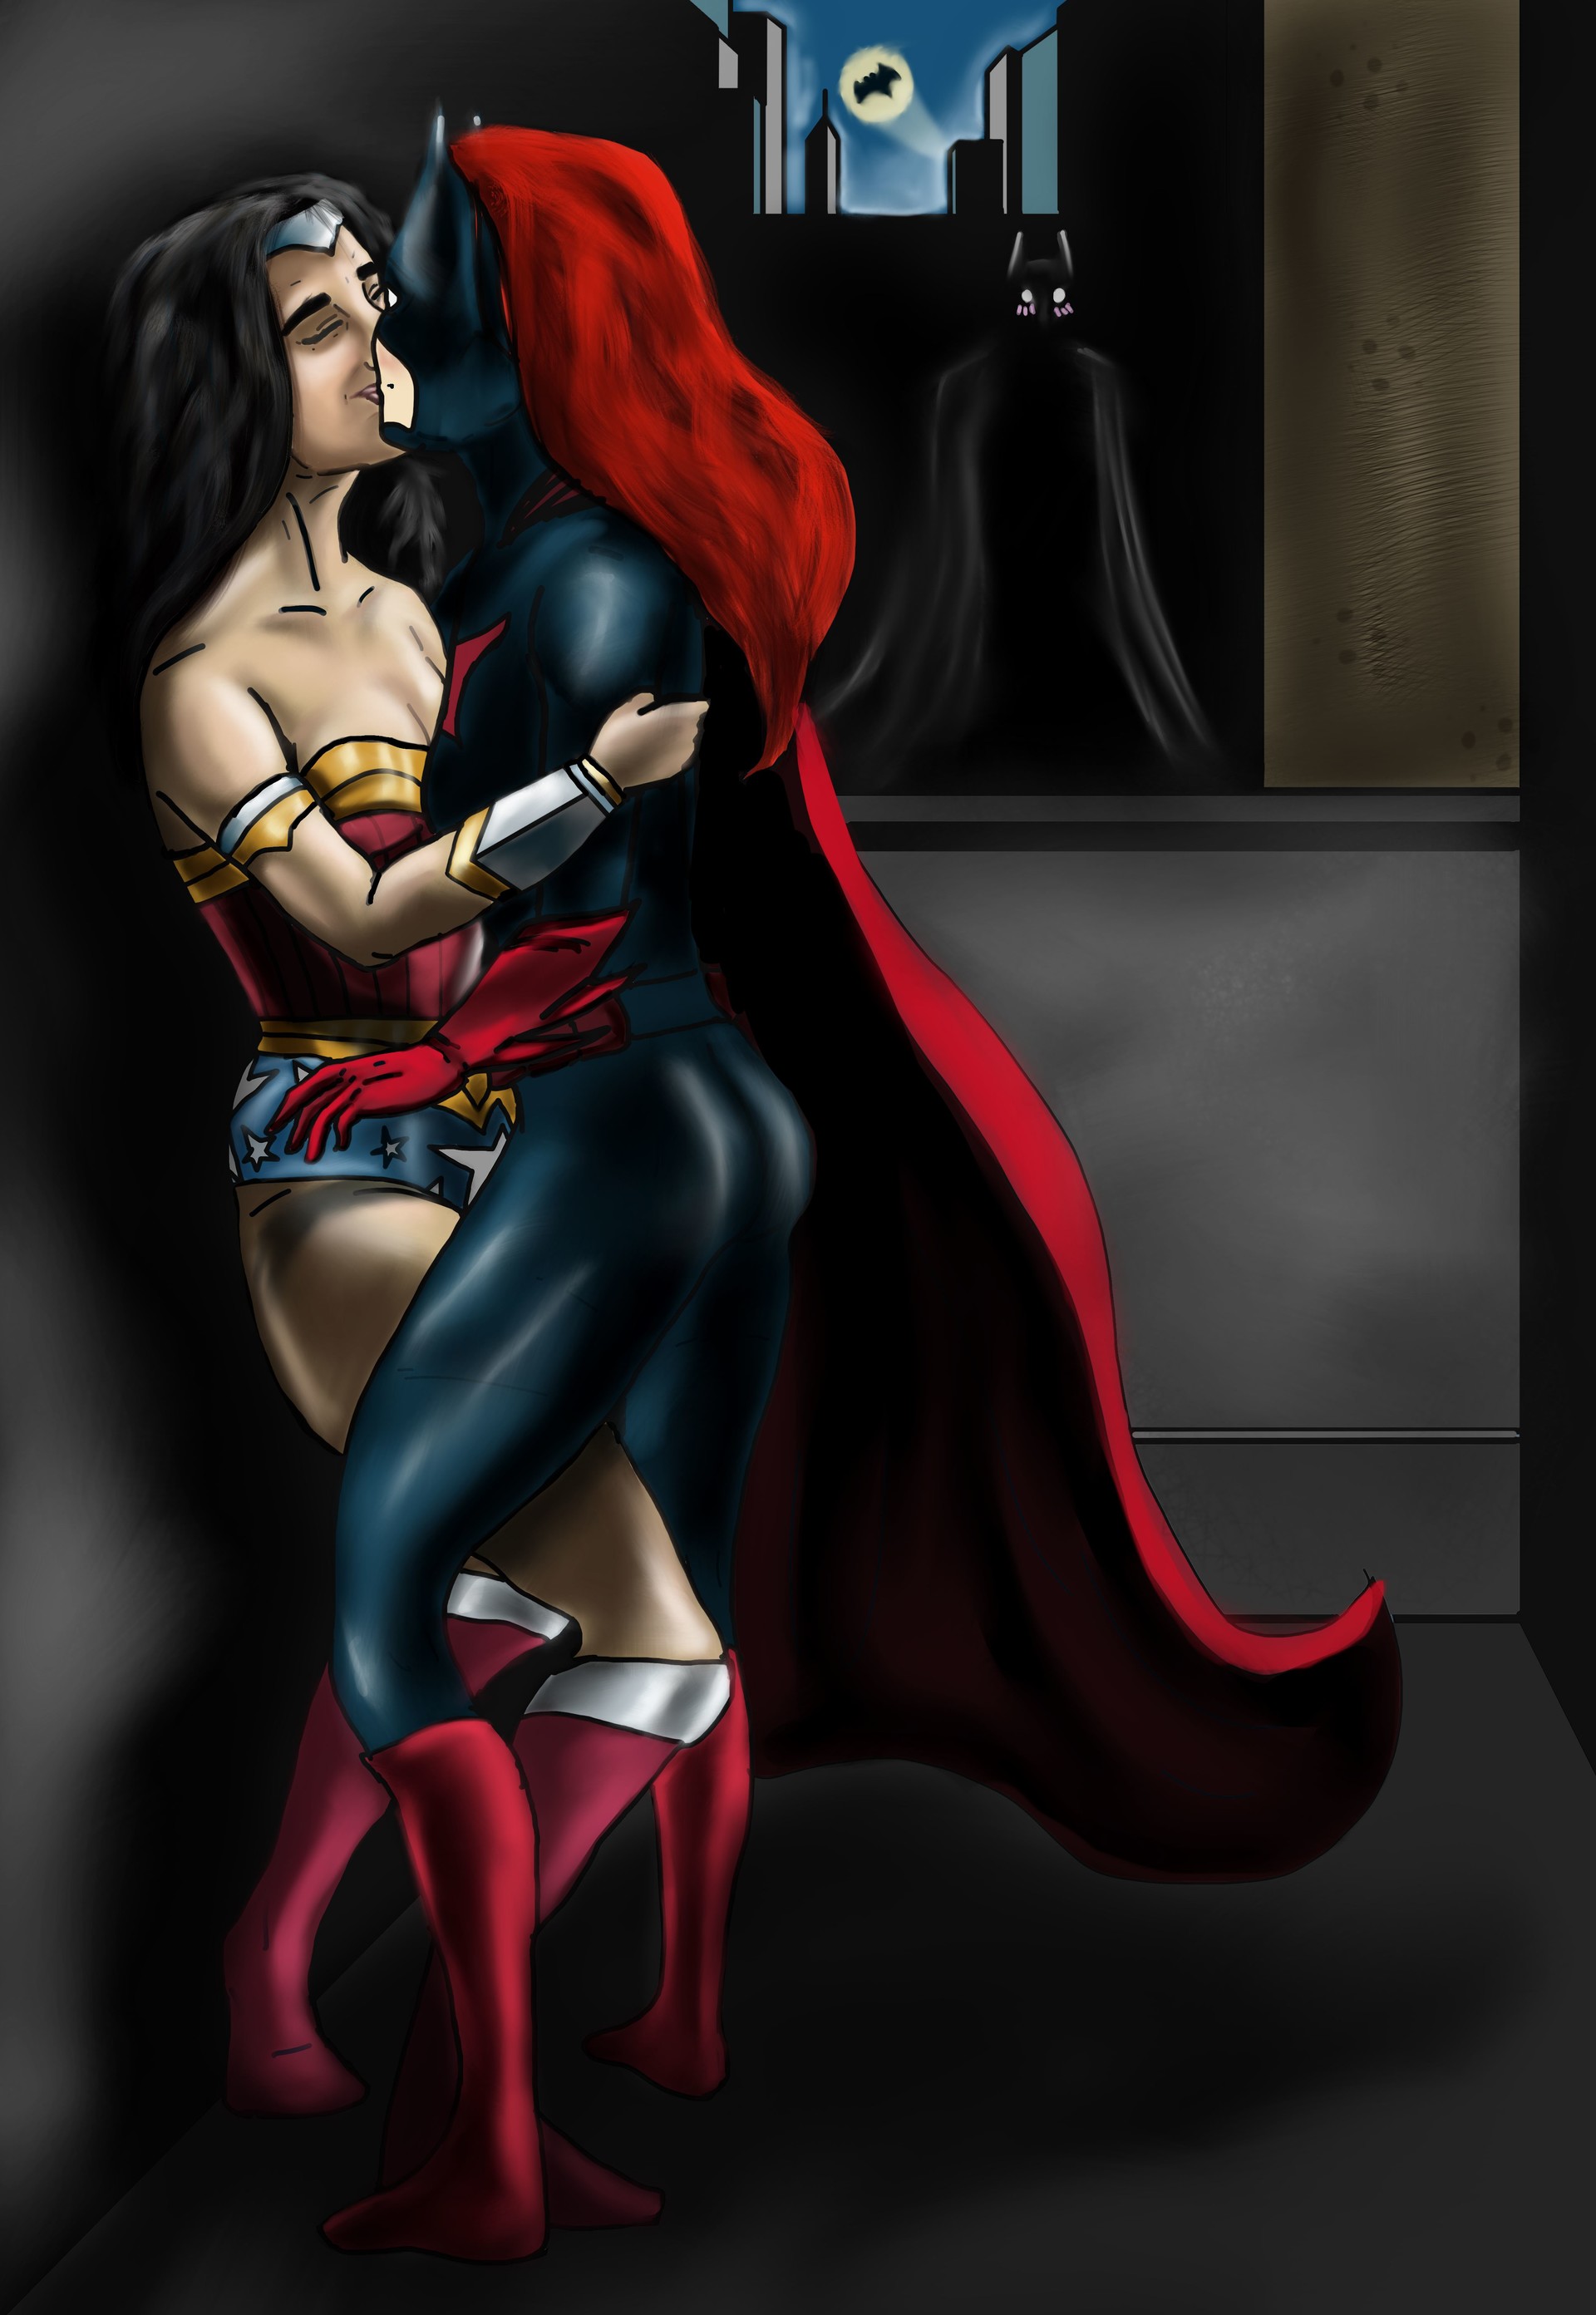 I wanted to do a piece showing what if wonder woman and batwoman were havin...